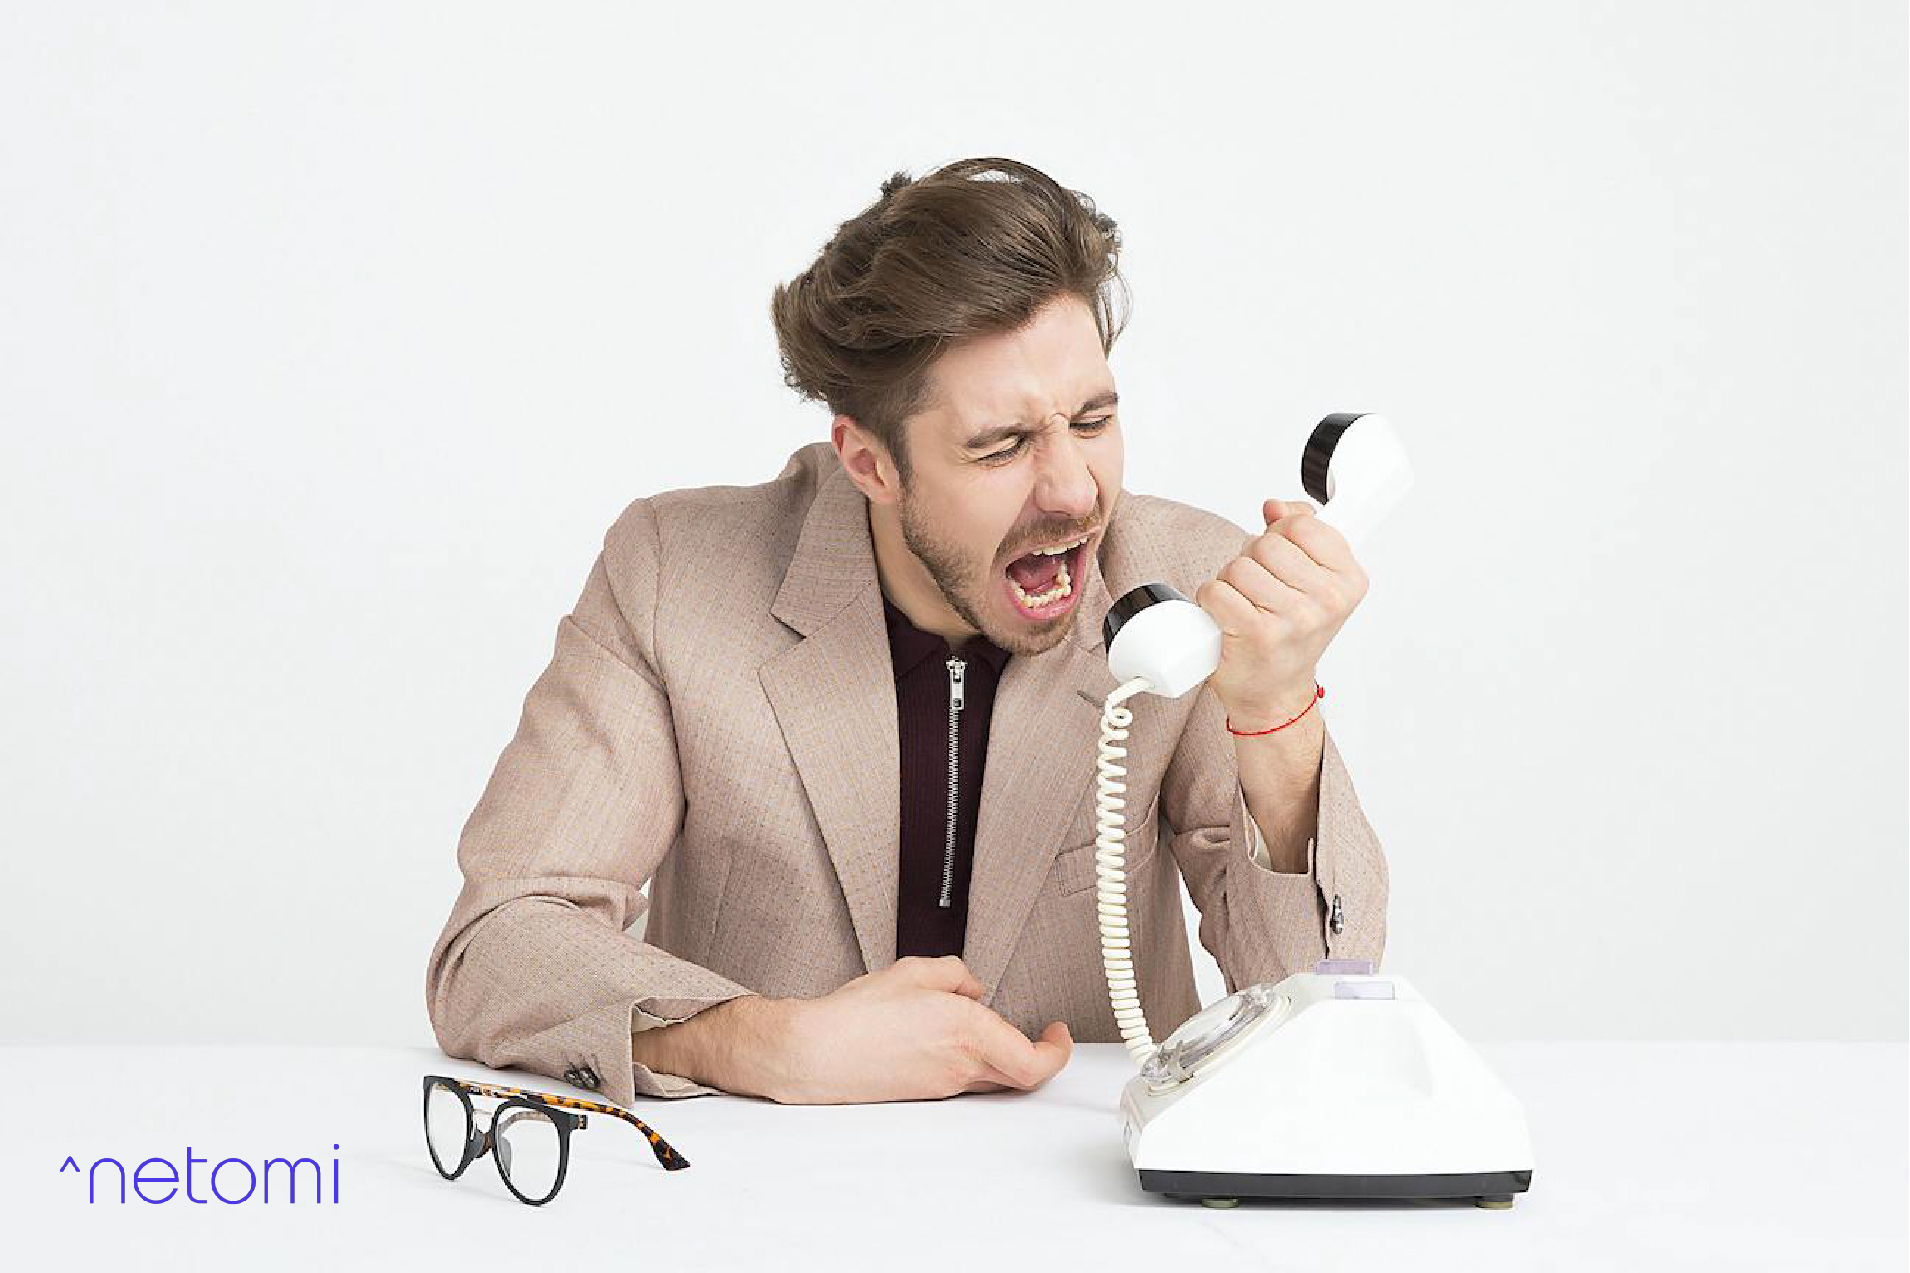 Tales from a Call Center: How to Improve the Agent Experience